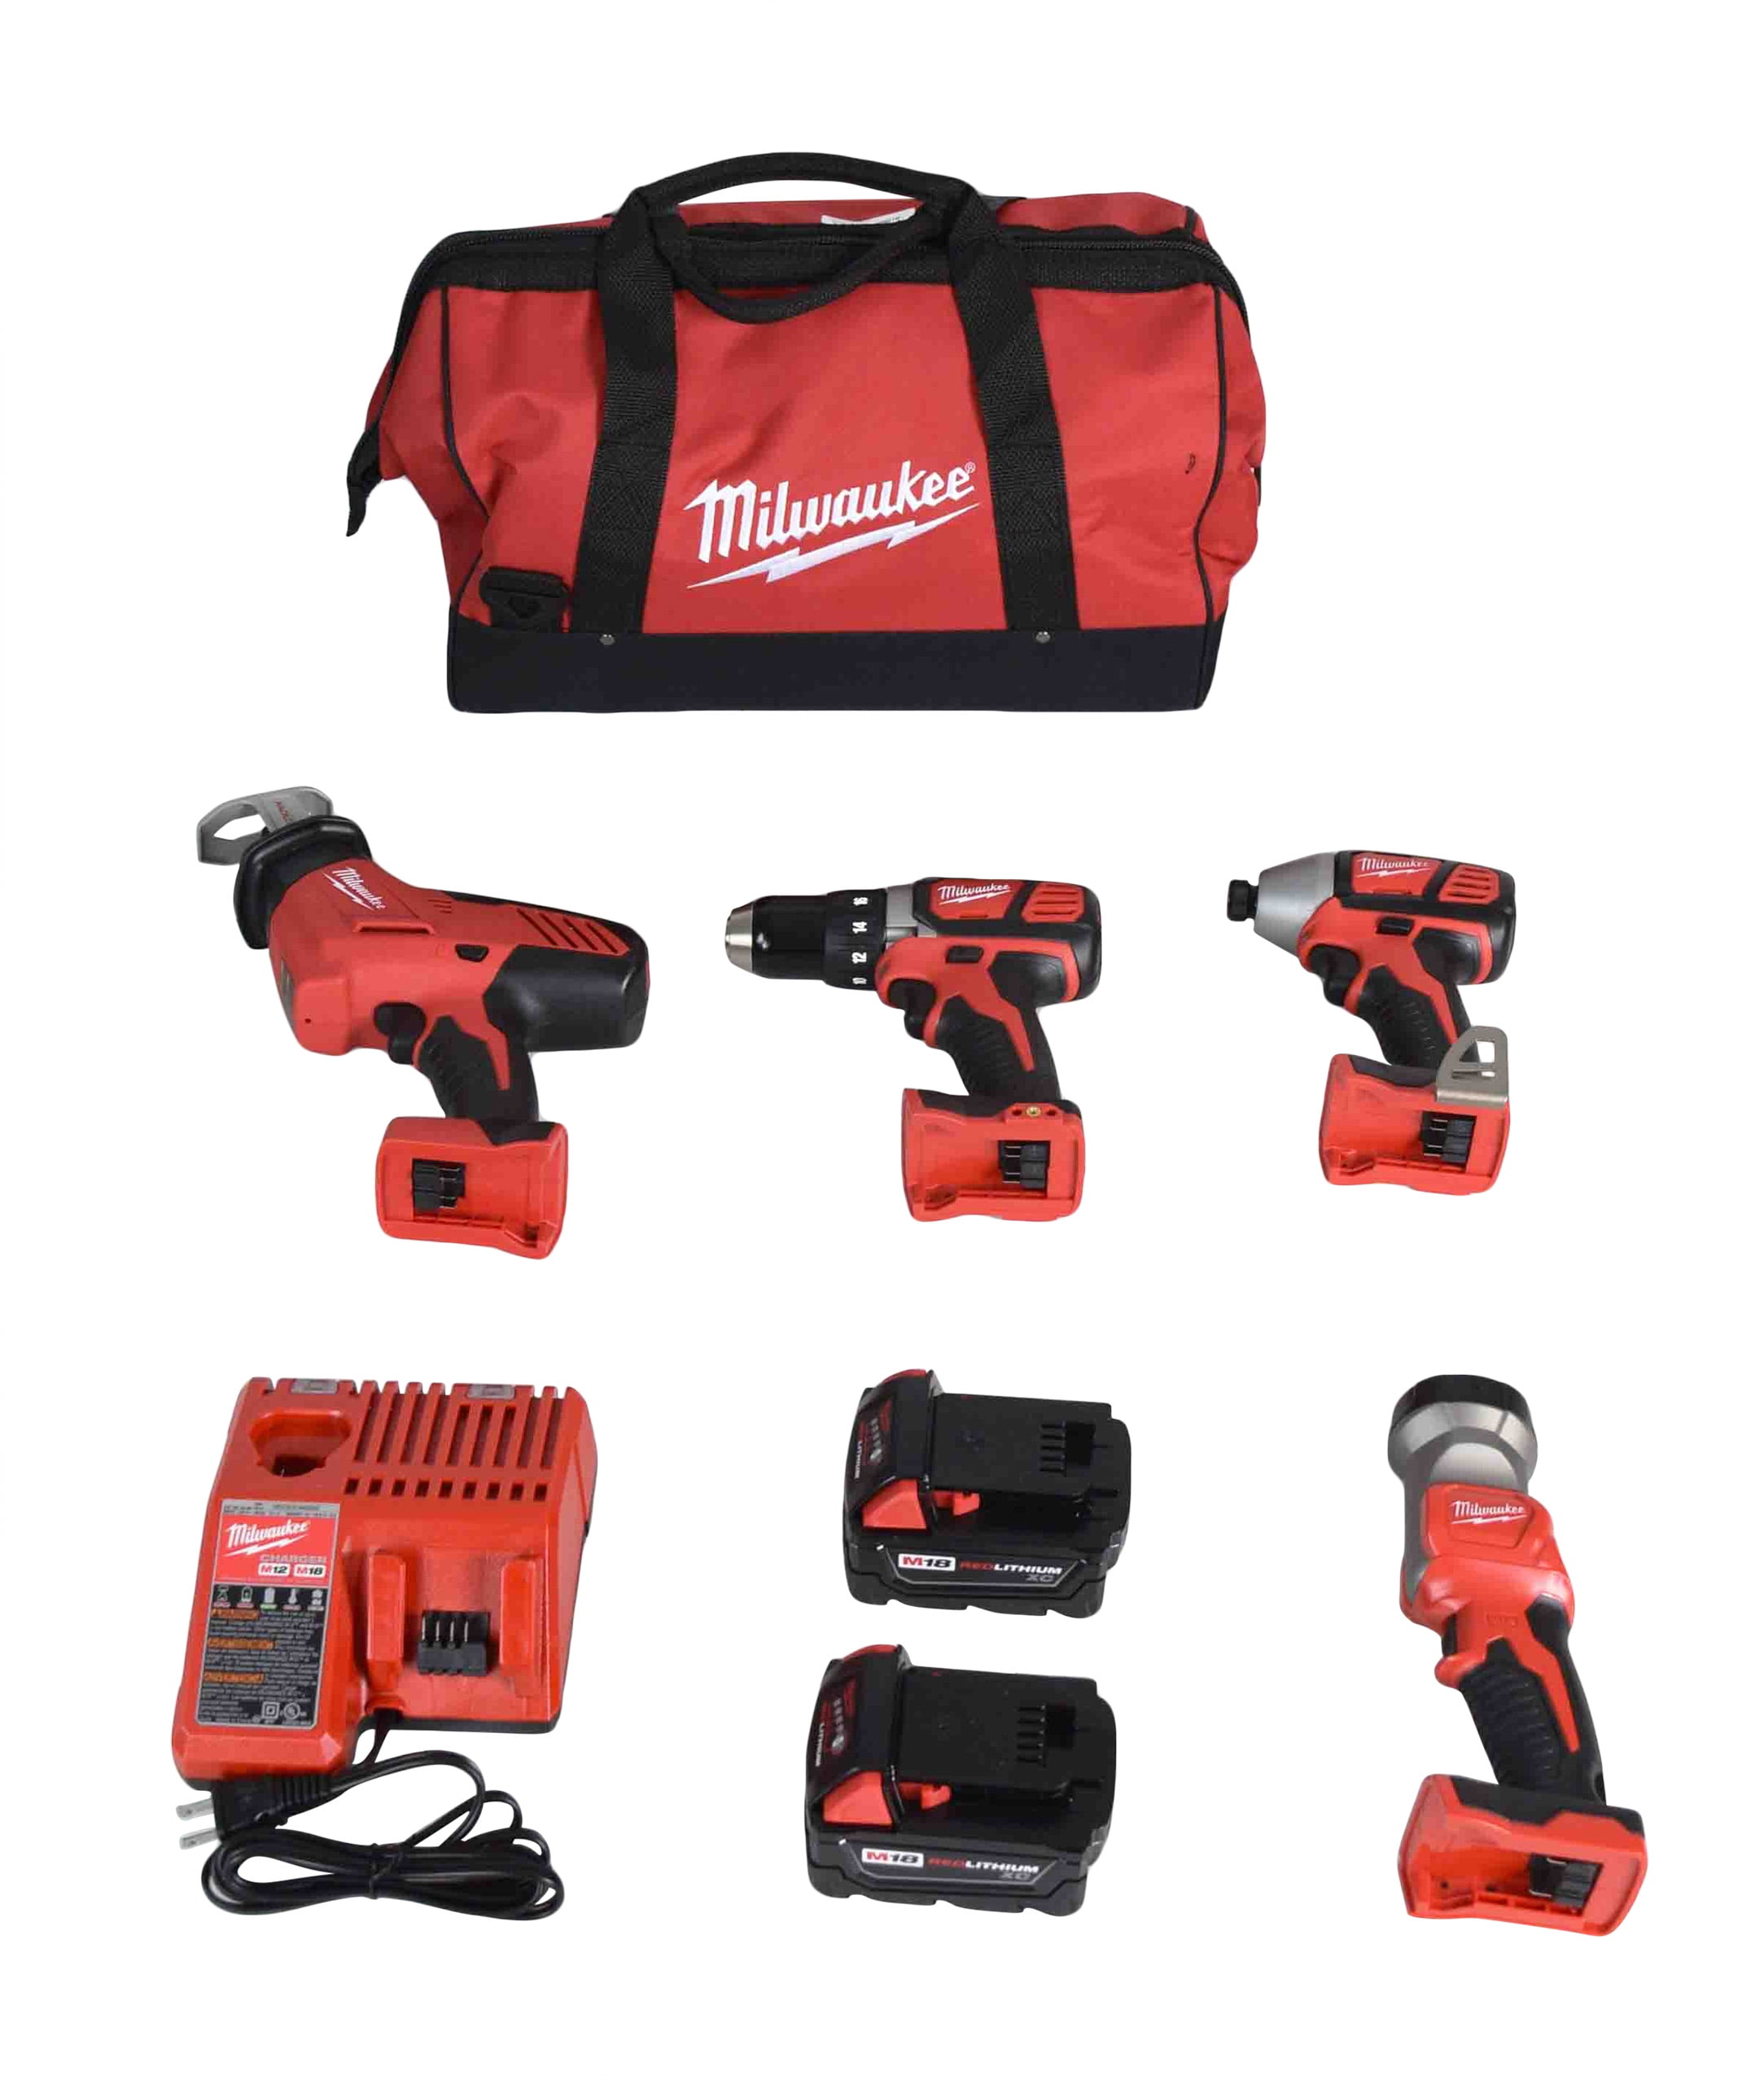 Carrying Travel Case 18 V Lithium-Ion Hammer Driver Drill Hard Tools Durable New 